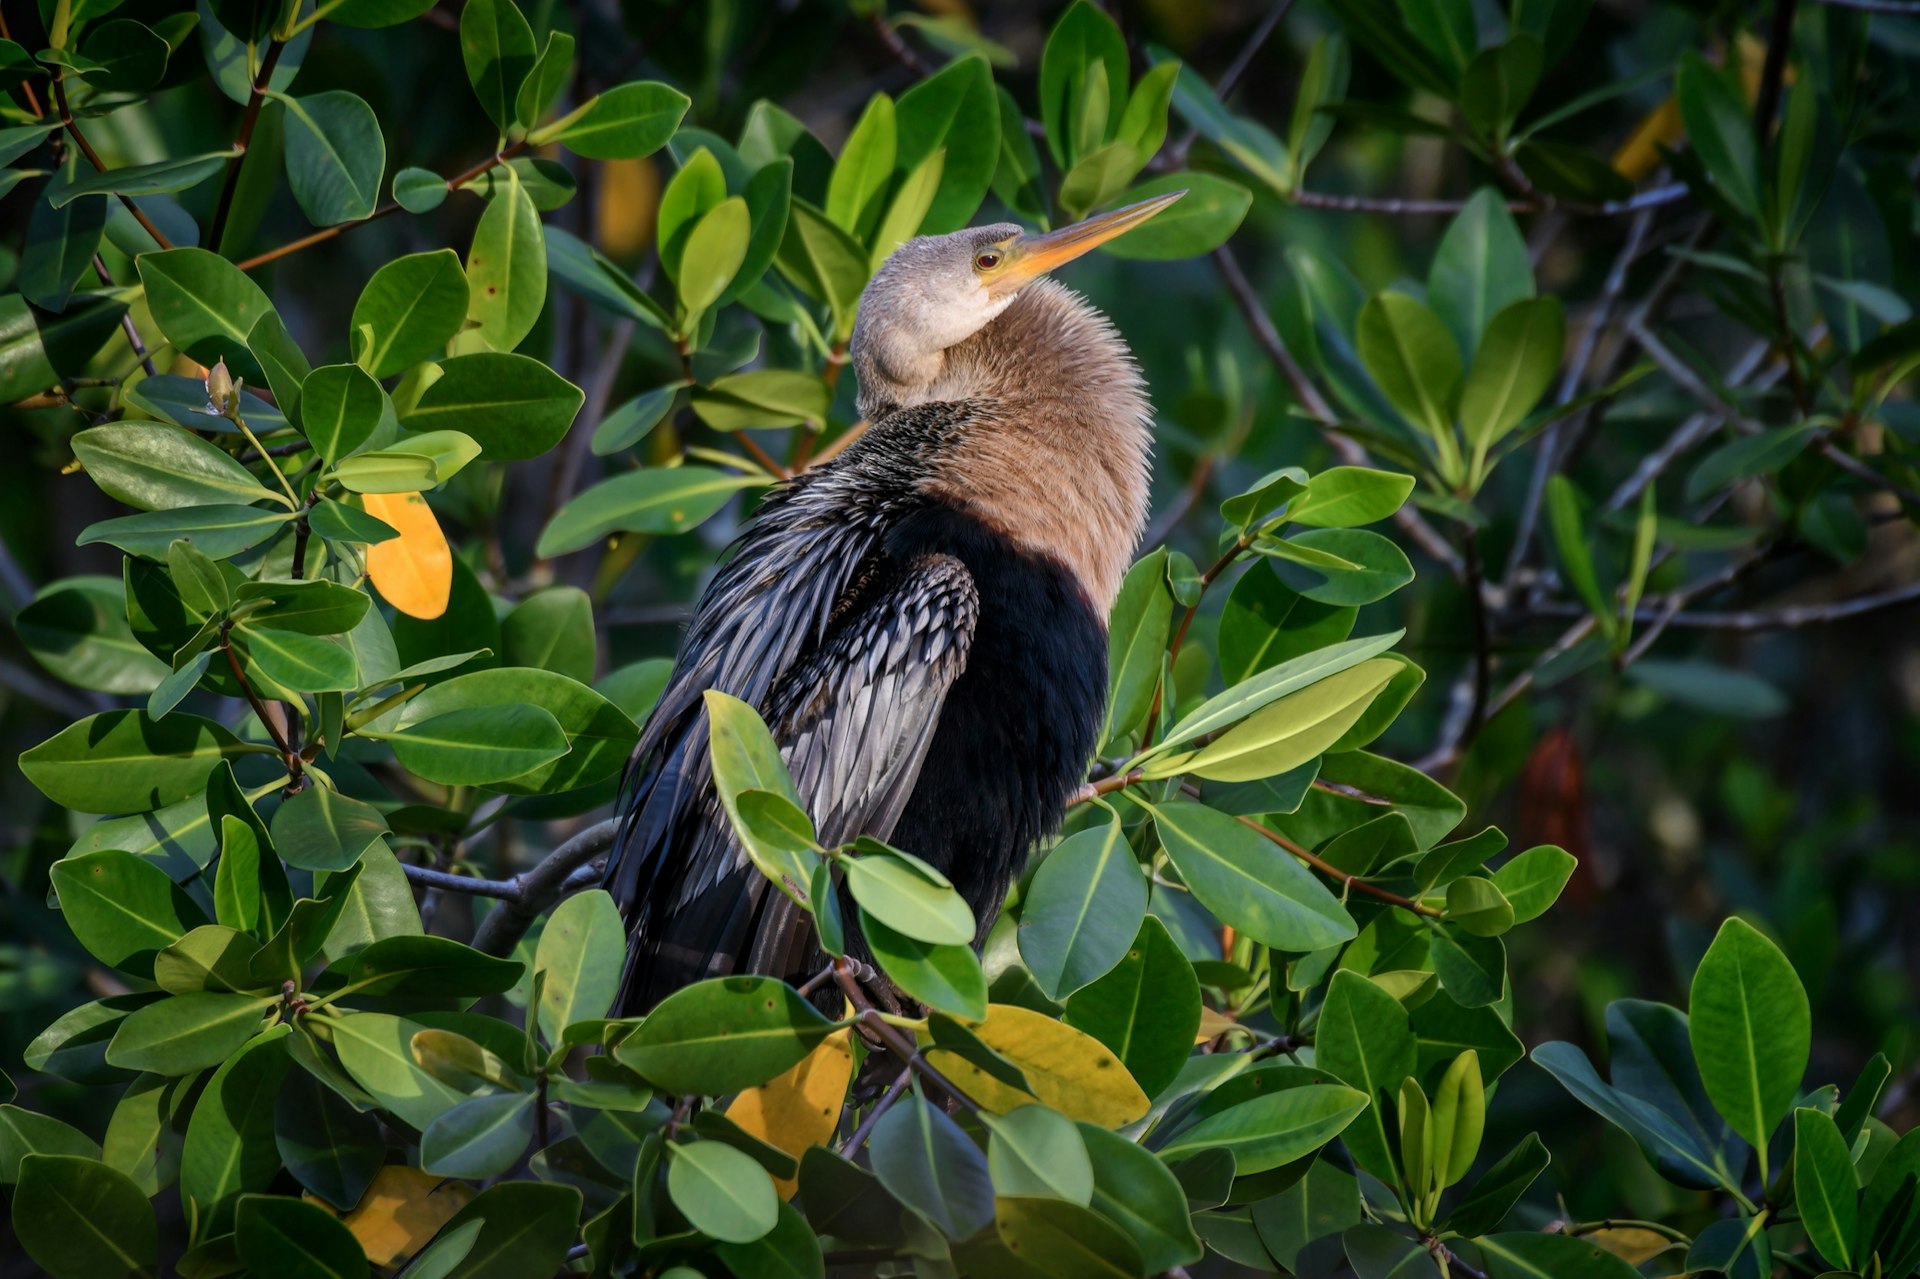 Anhinga perched in a mangrove at sunrise at 10,000 Islands National Wildlife Refuge